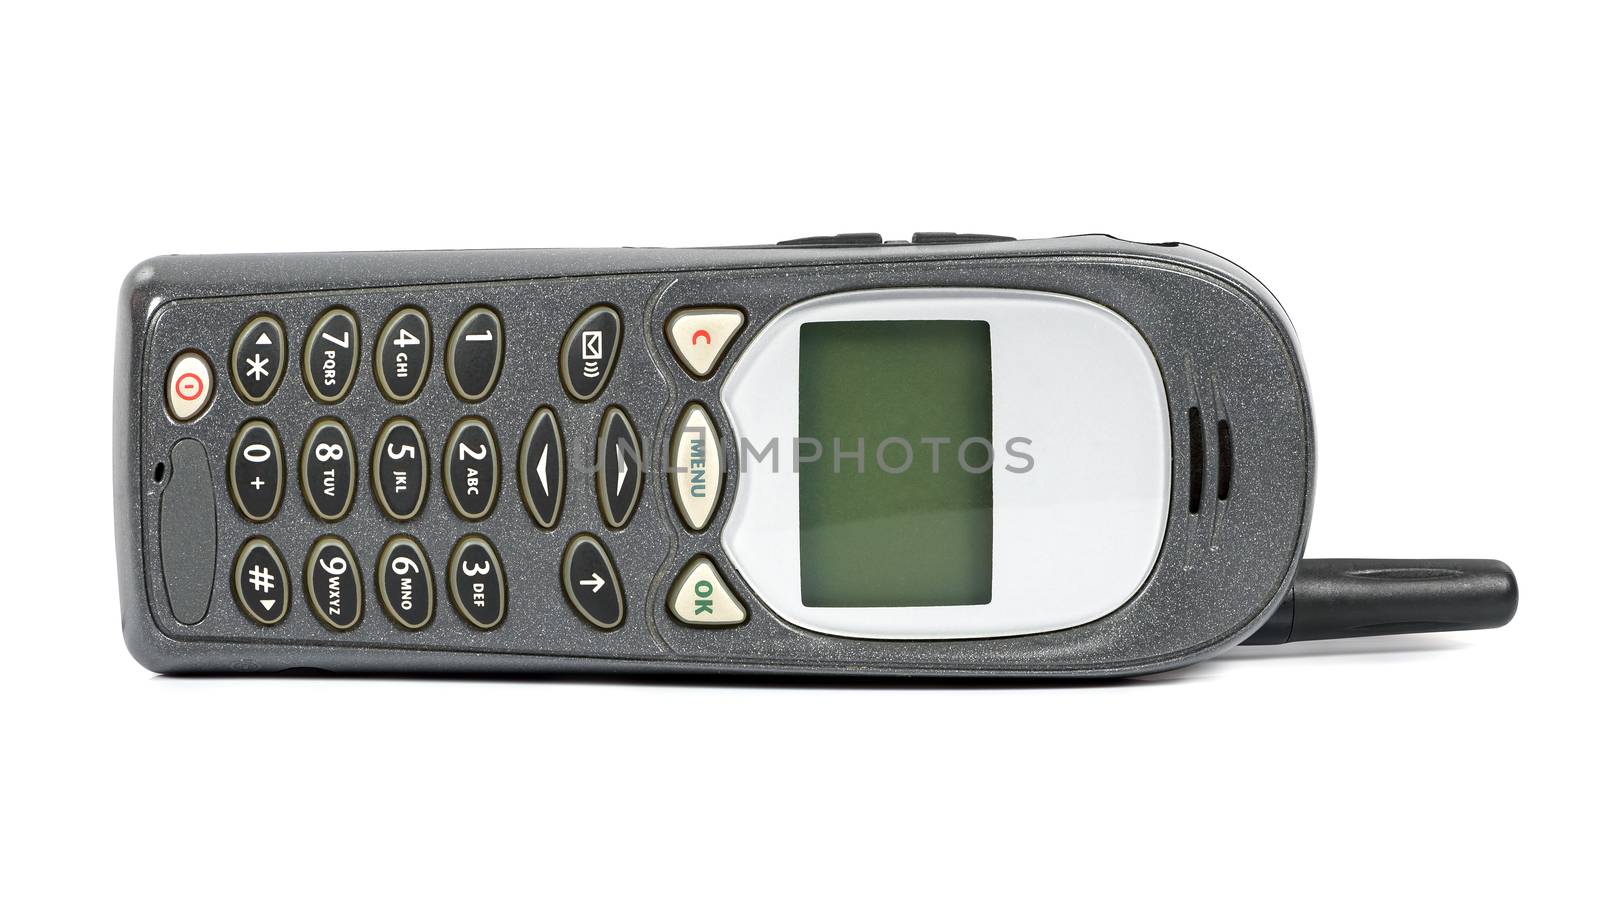 Old mobile phone isolated on white background with clipping path